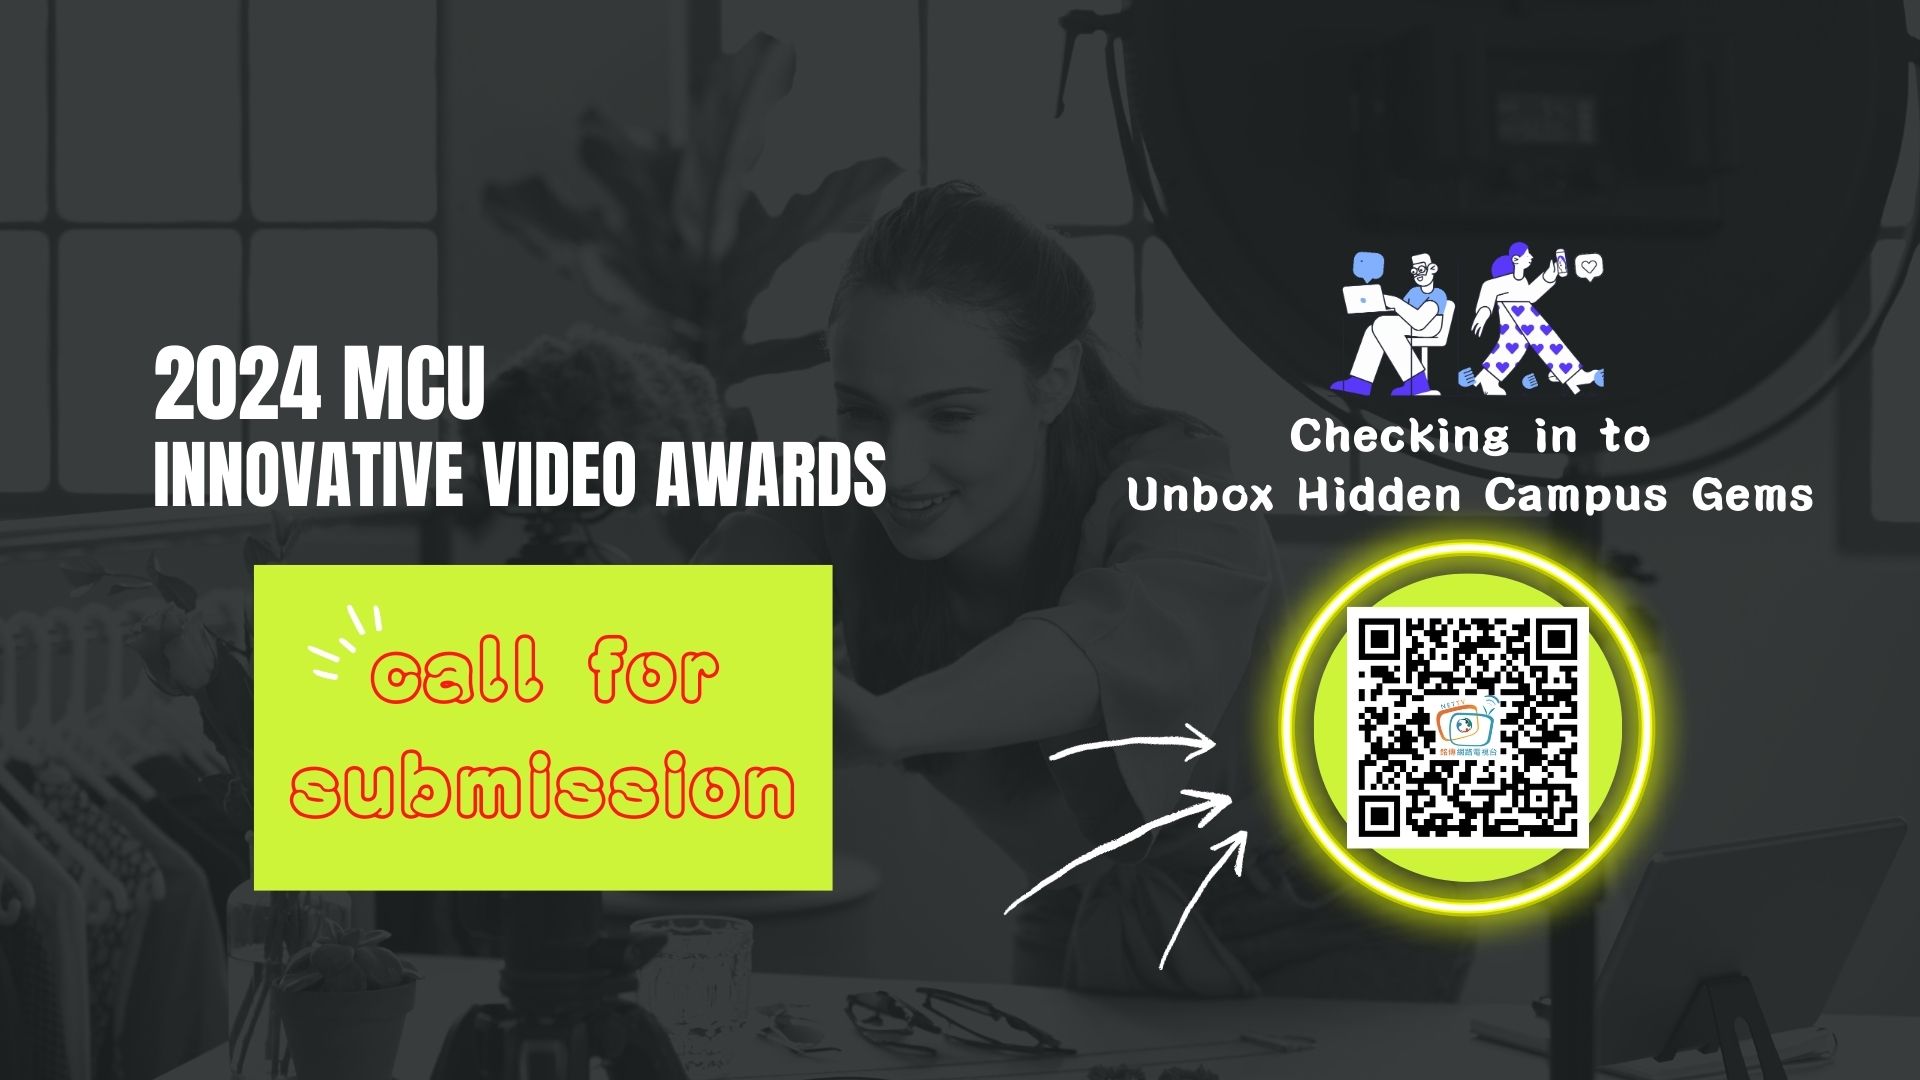 Featured image for “2024 Innovative Video Awards: Creative Short Video Contest Now Open for Submissions.”